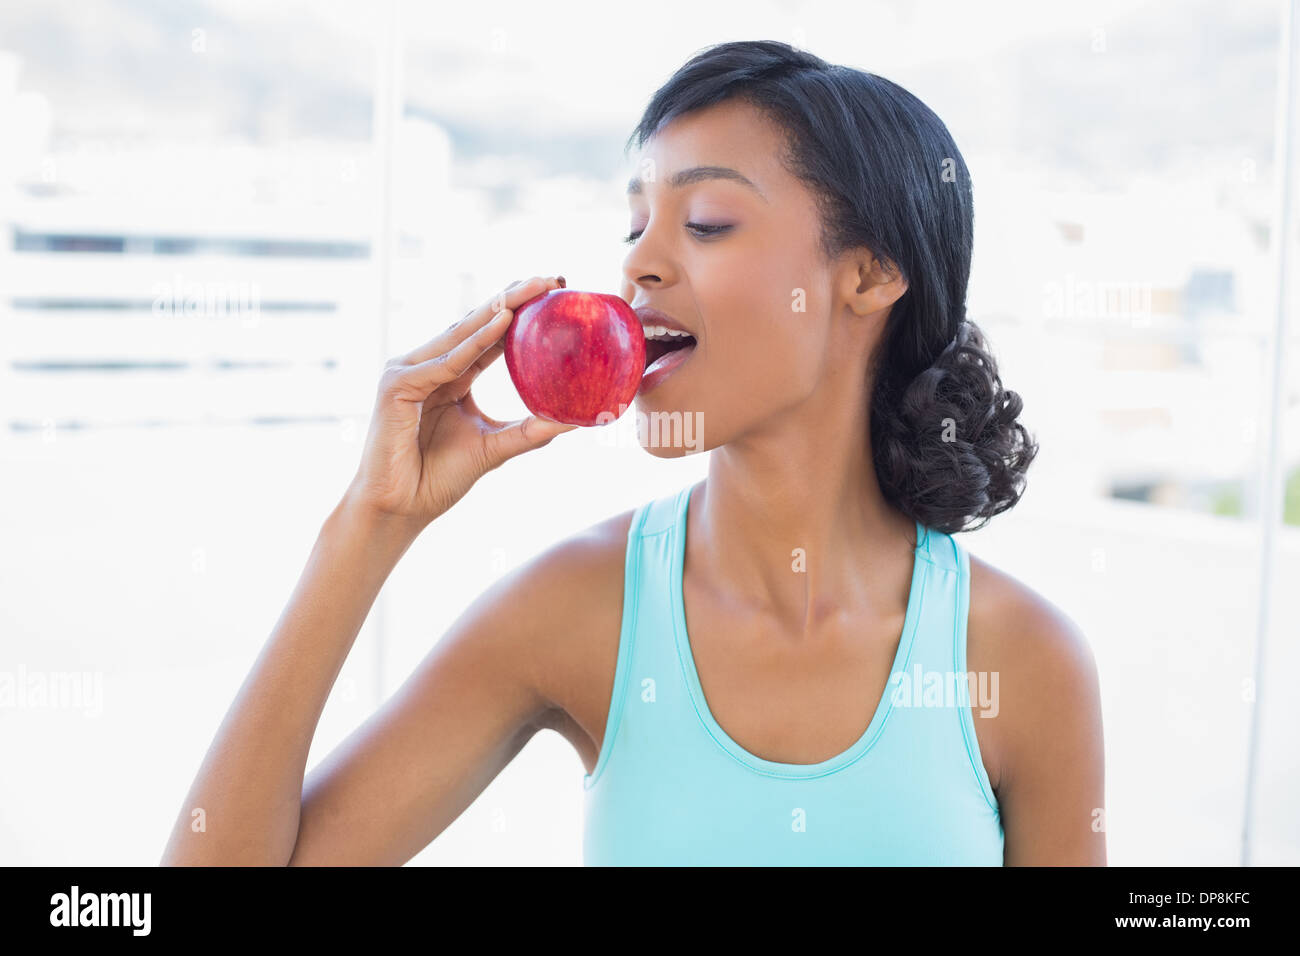 Lovely black haired woman eating an apple Stock Photo